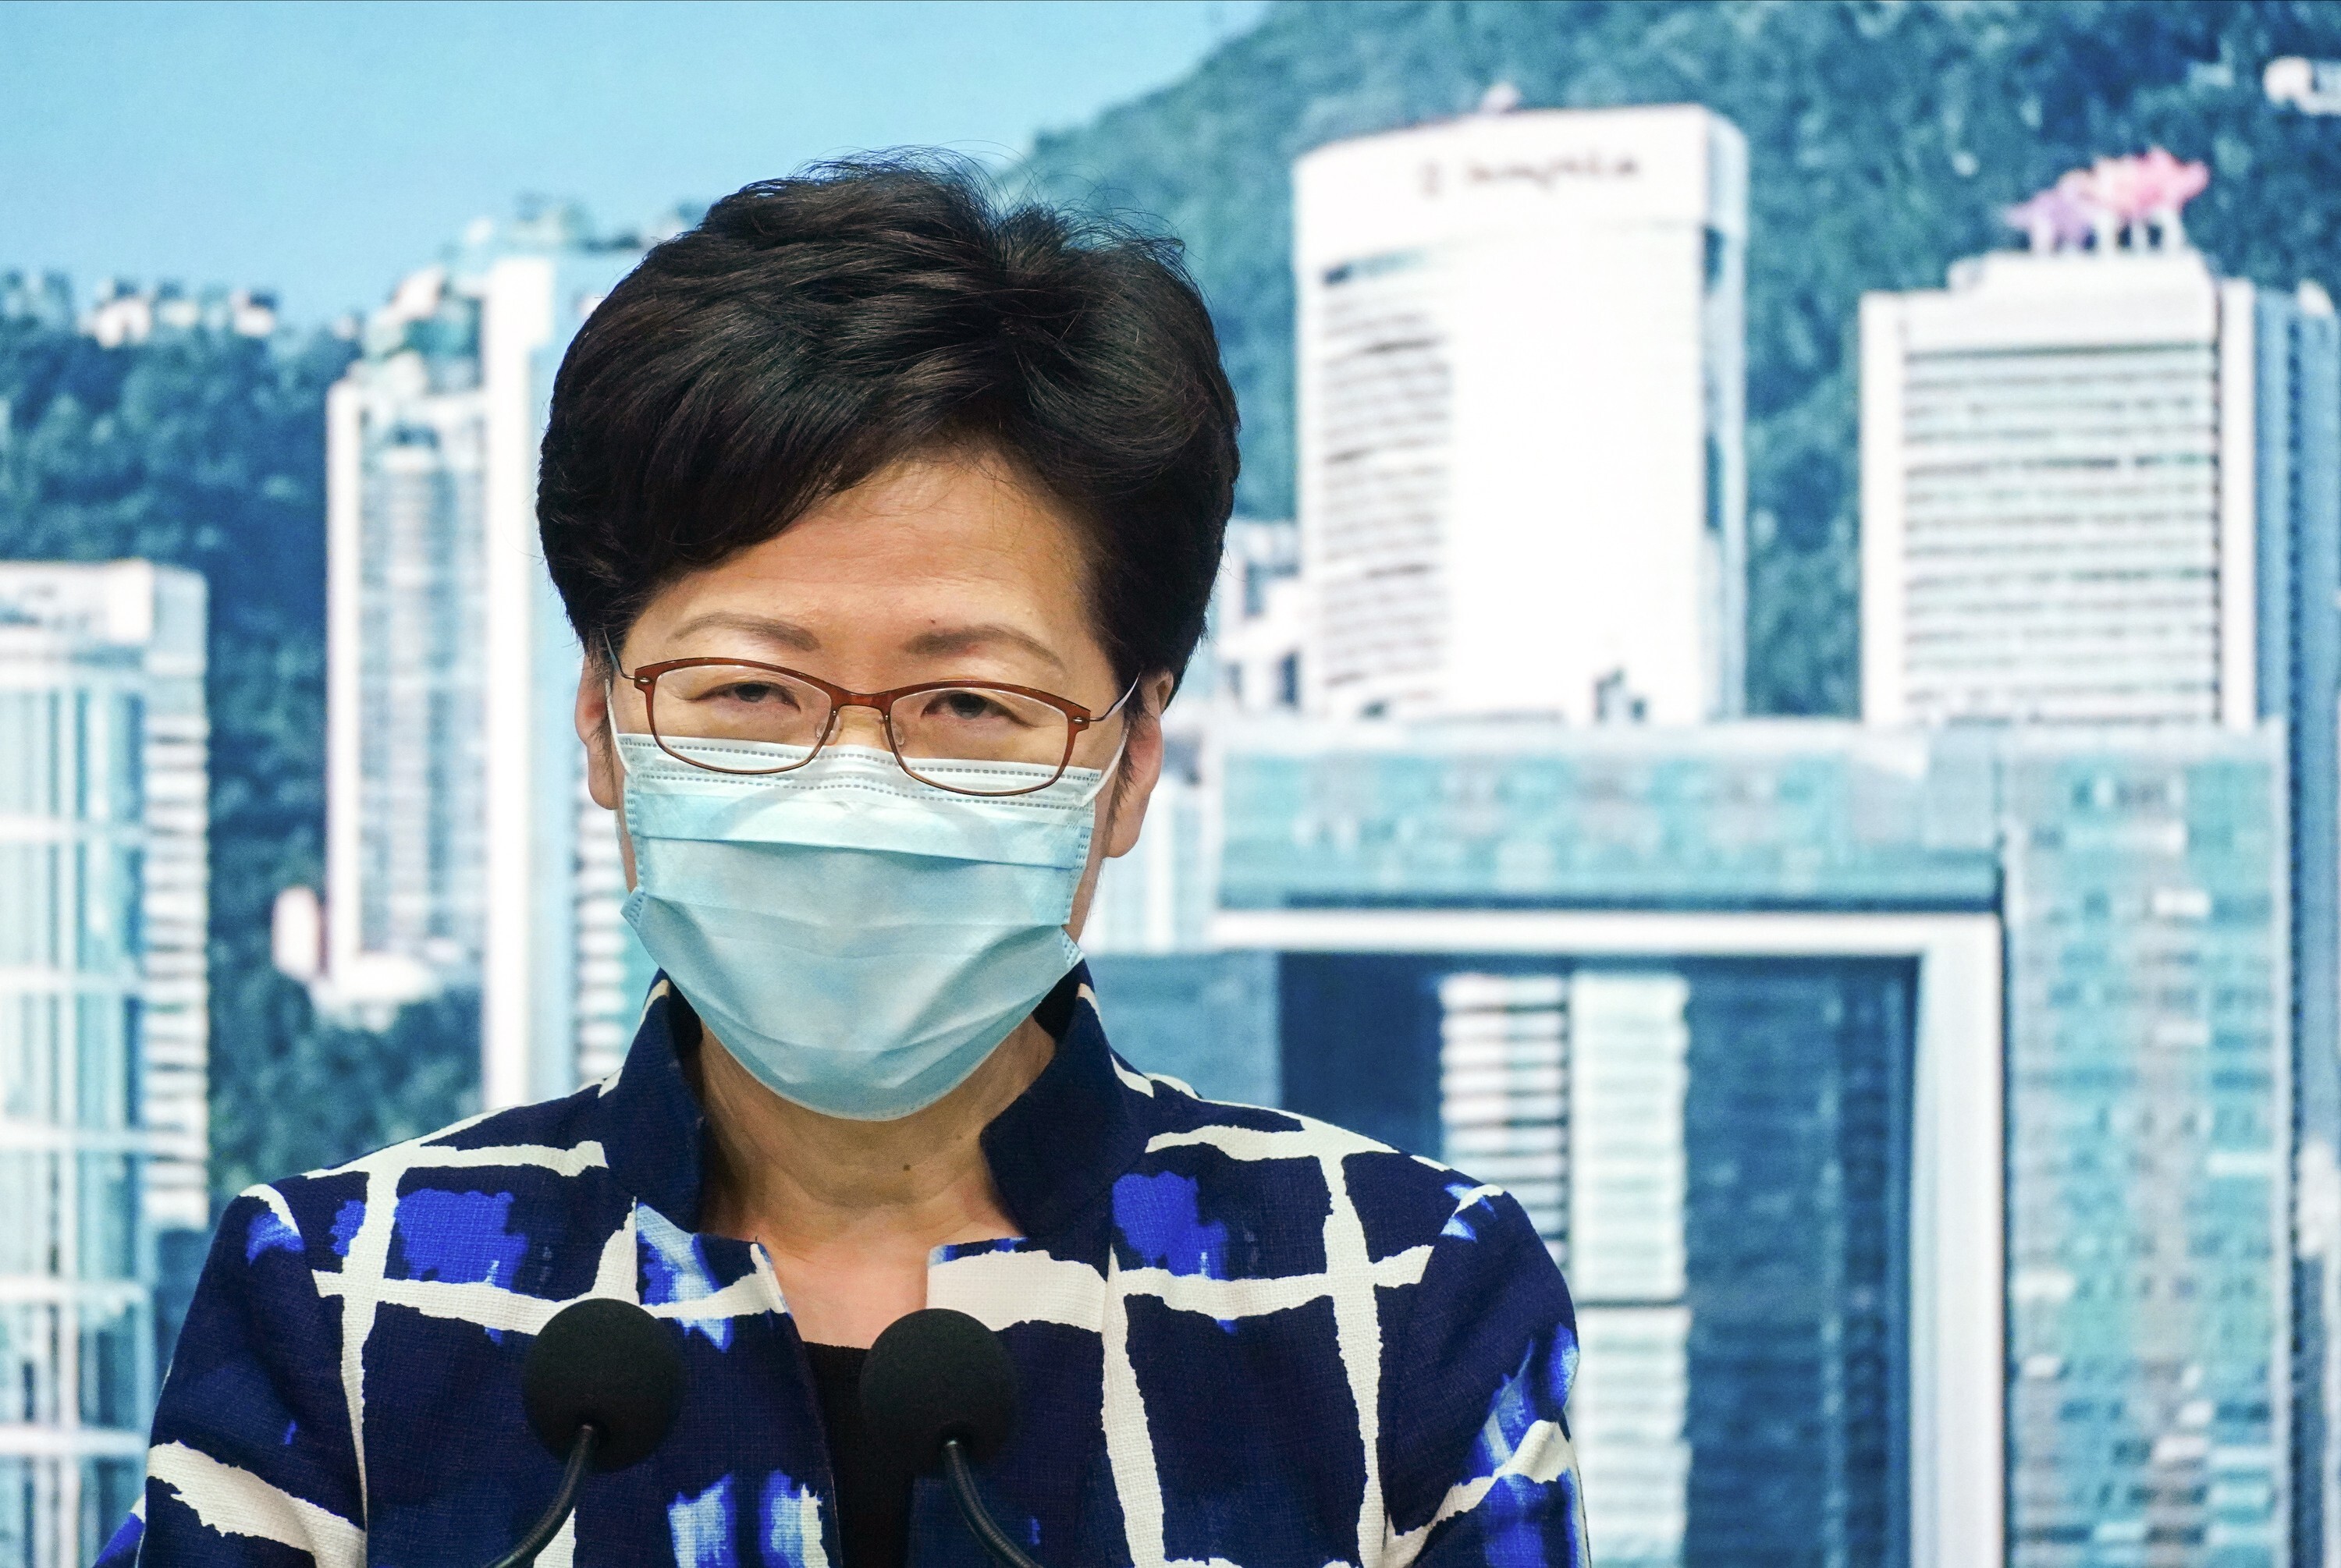 Hong Kong Chief Executive Carrie Lam says her only aspiration has been to serve. Photo: Sam Tsang